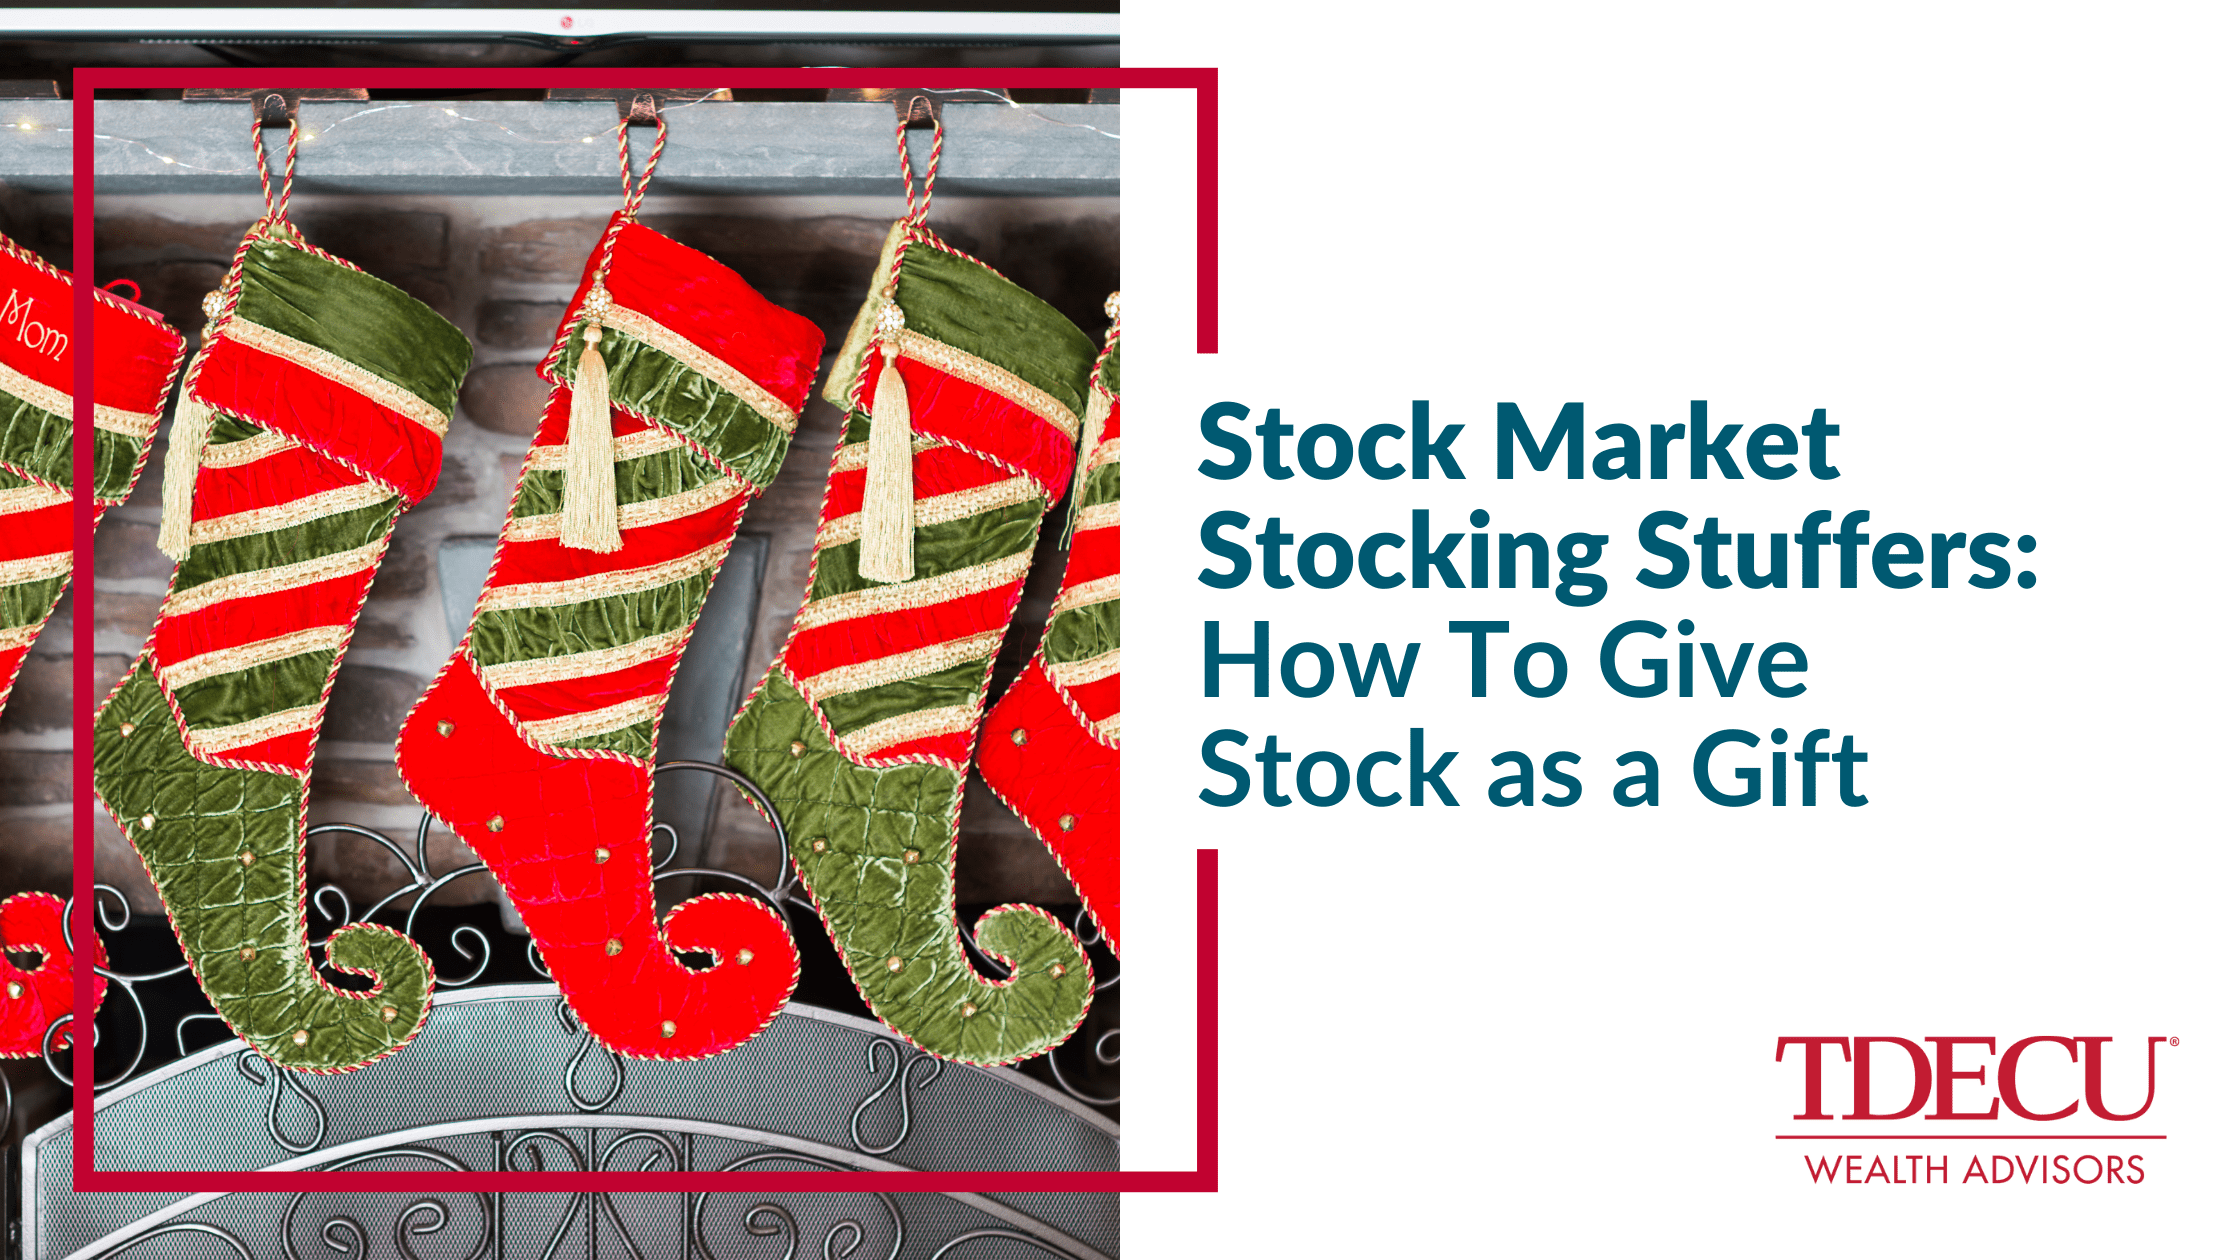 Stock Market Stocking Stuffers: How To Give Stock as a Gift